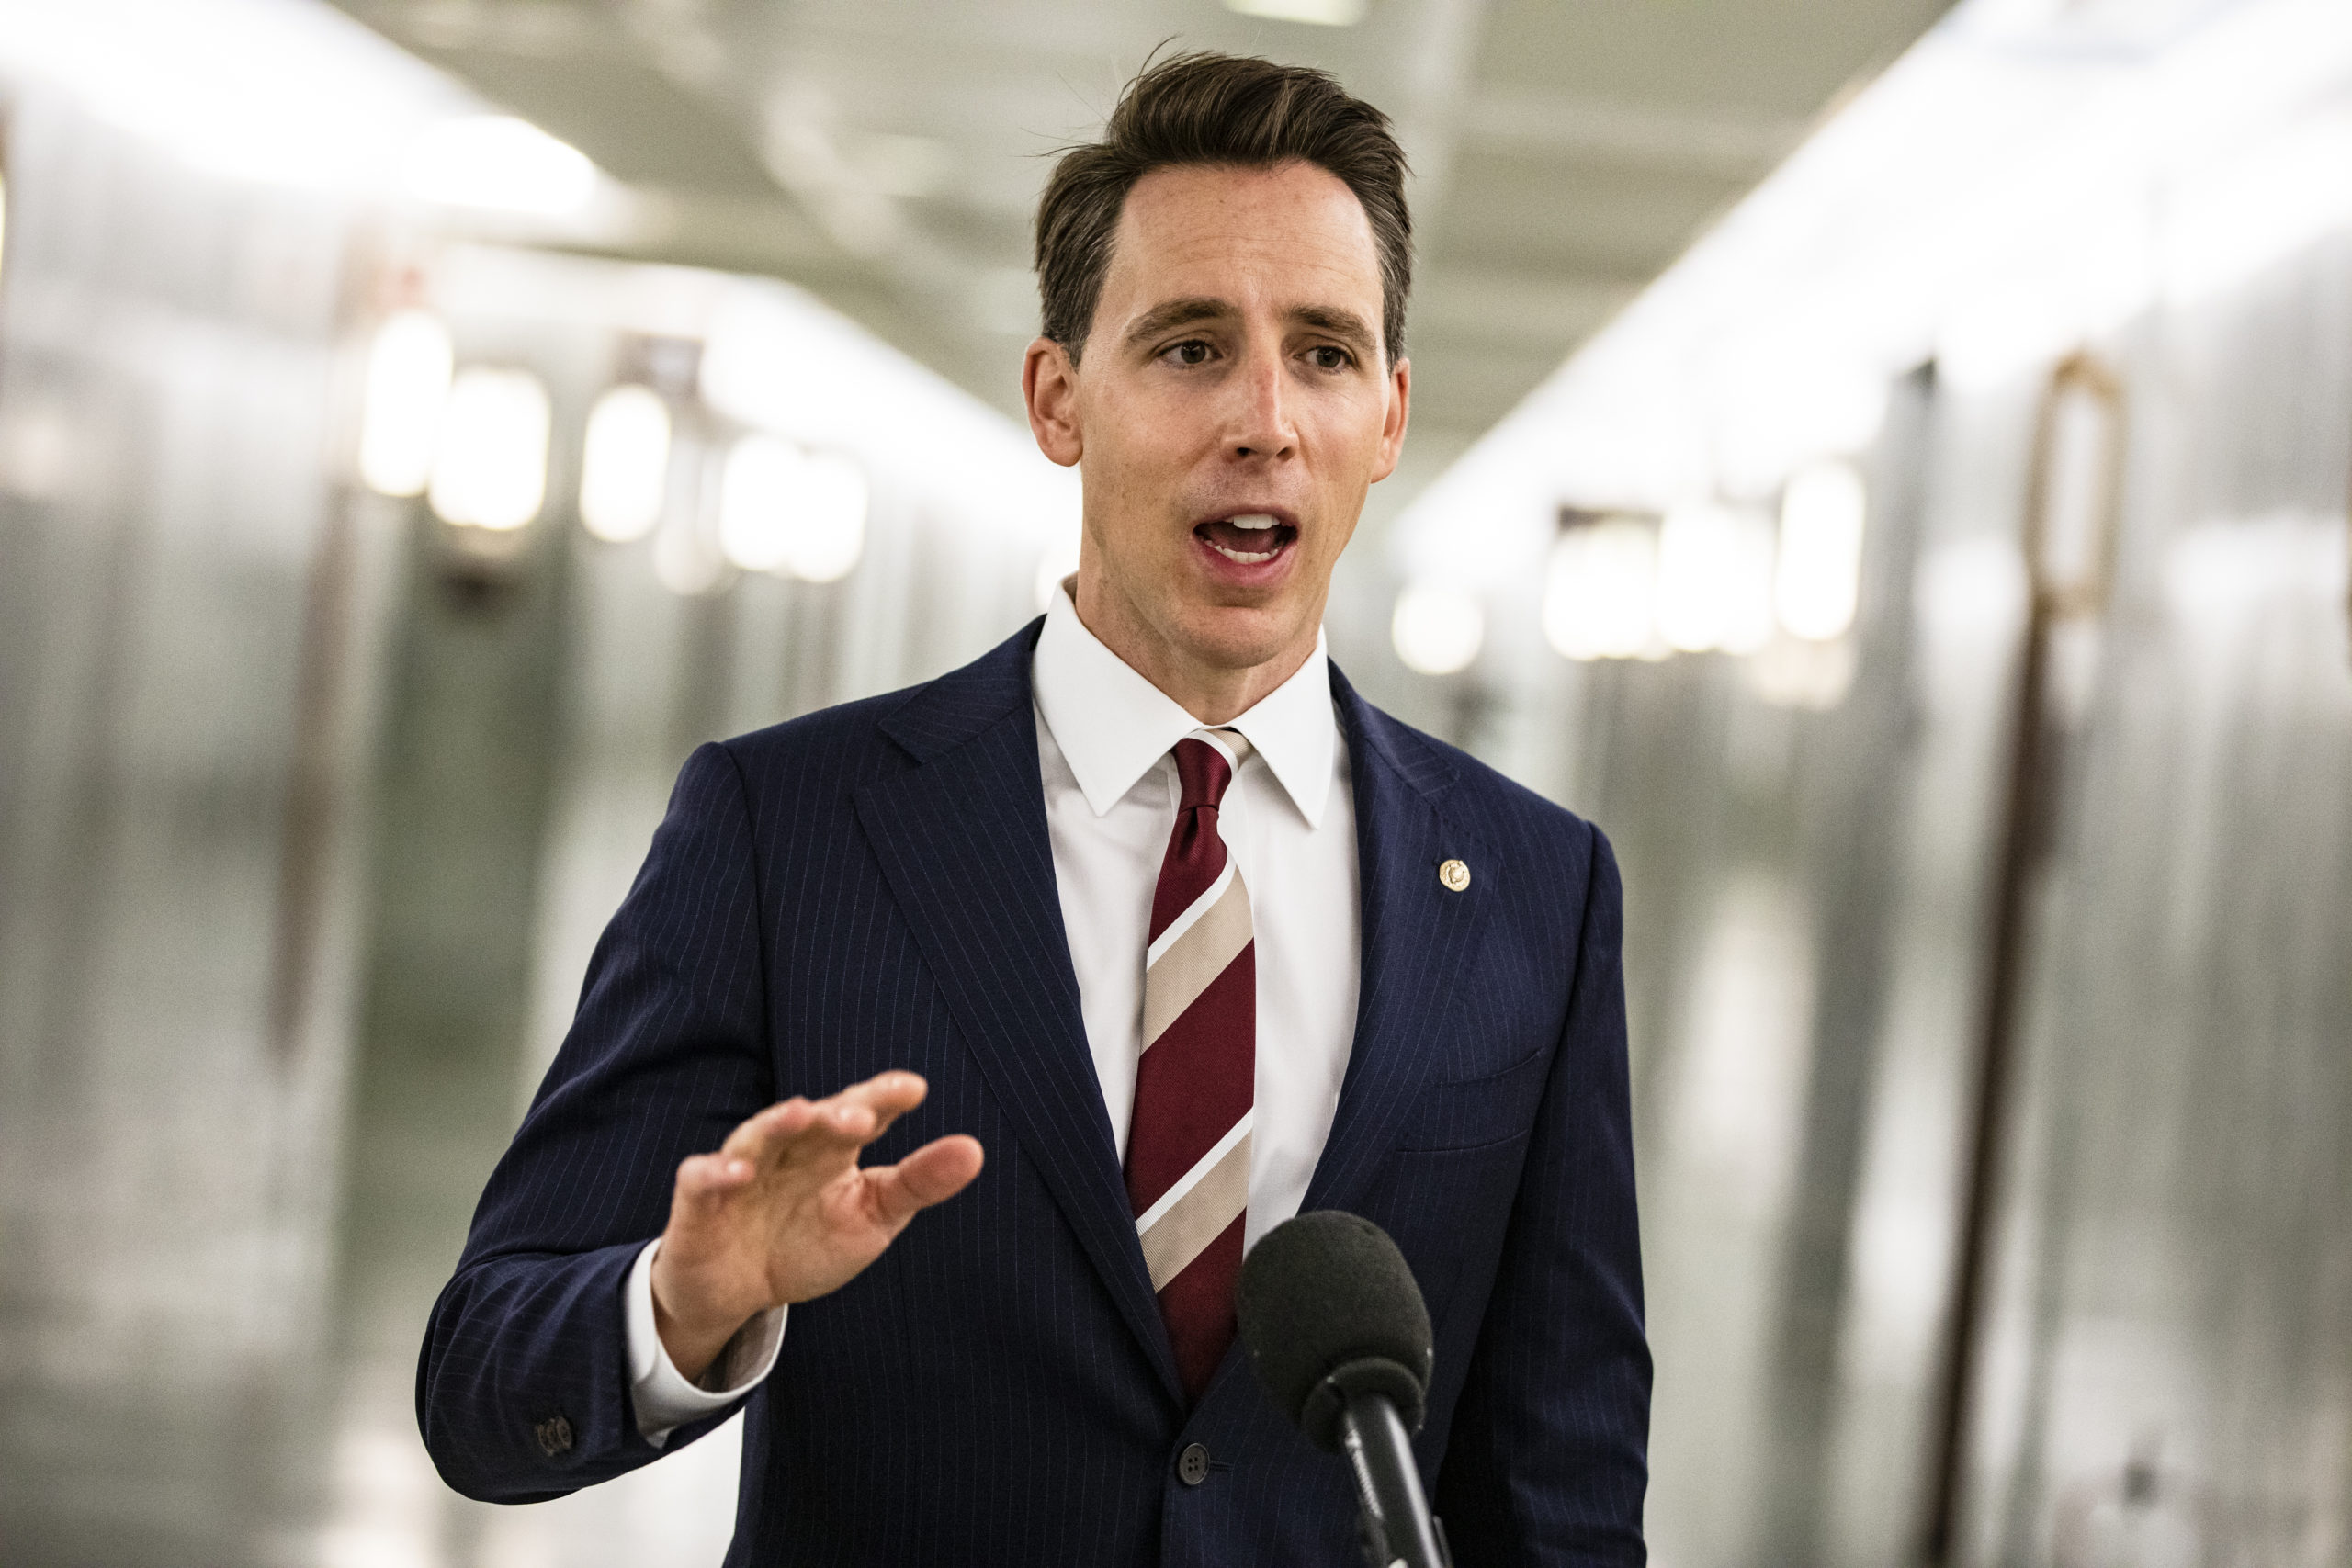 WASHINGTON, DC - OCTOBER 22: Senator Josh Hawley (R-MO) makes a statement after voting in the Judiciary Committee to move the nomination of Judge Amy Coney Barrett to the Supreme Court out of committee and on to the Senate for a full vote on October 22, 2020 in Washington, DC. Judge Amy Coney Barrett was nominated by President Donald Trump to fill the vacancy left by Justice Ruth Bader Ginsburg who passed away in September. (Photo by Samuel Corum/Getty Images)